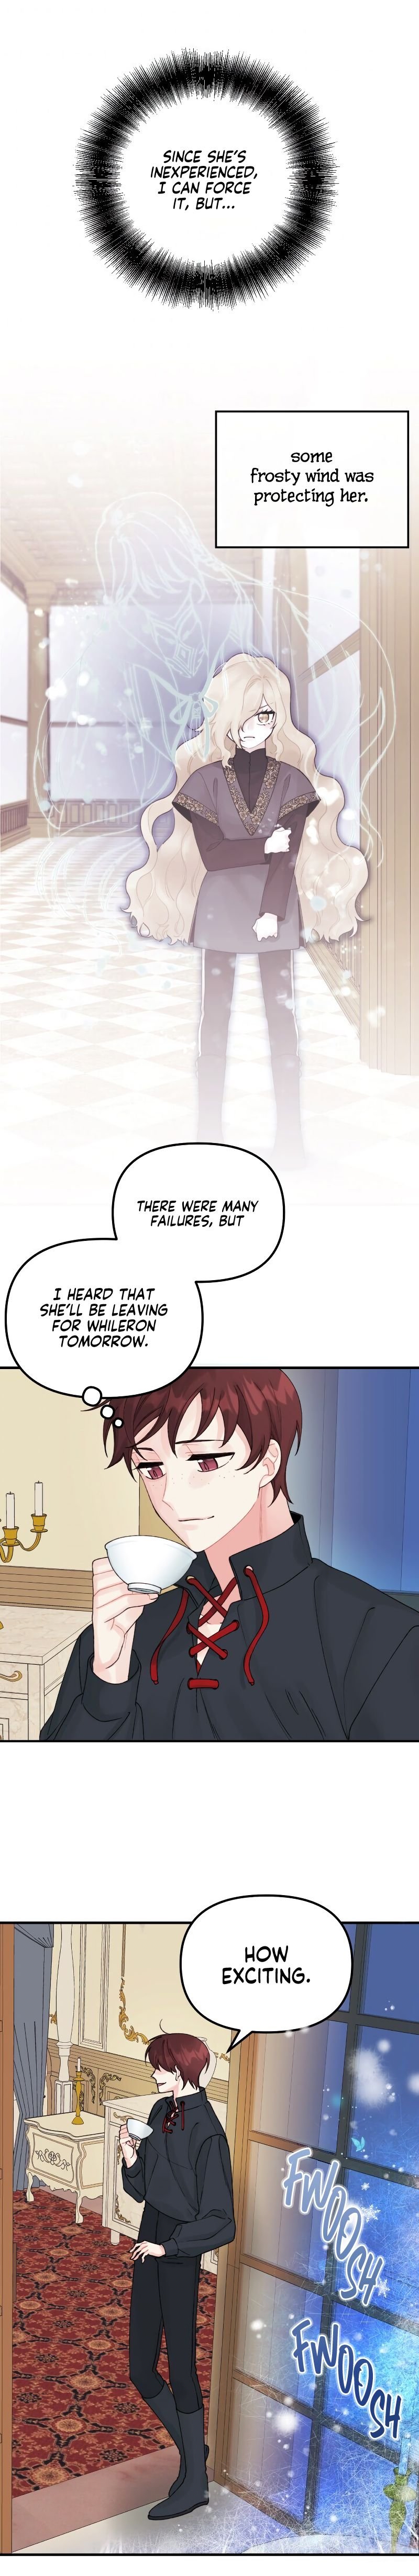 the-princess-in-the-dumpster-chap-36-1